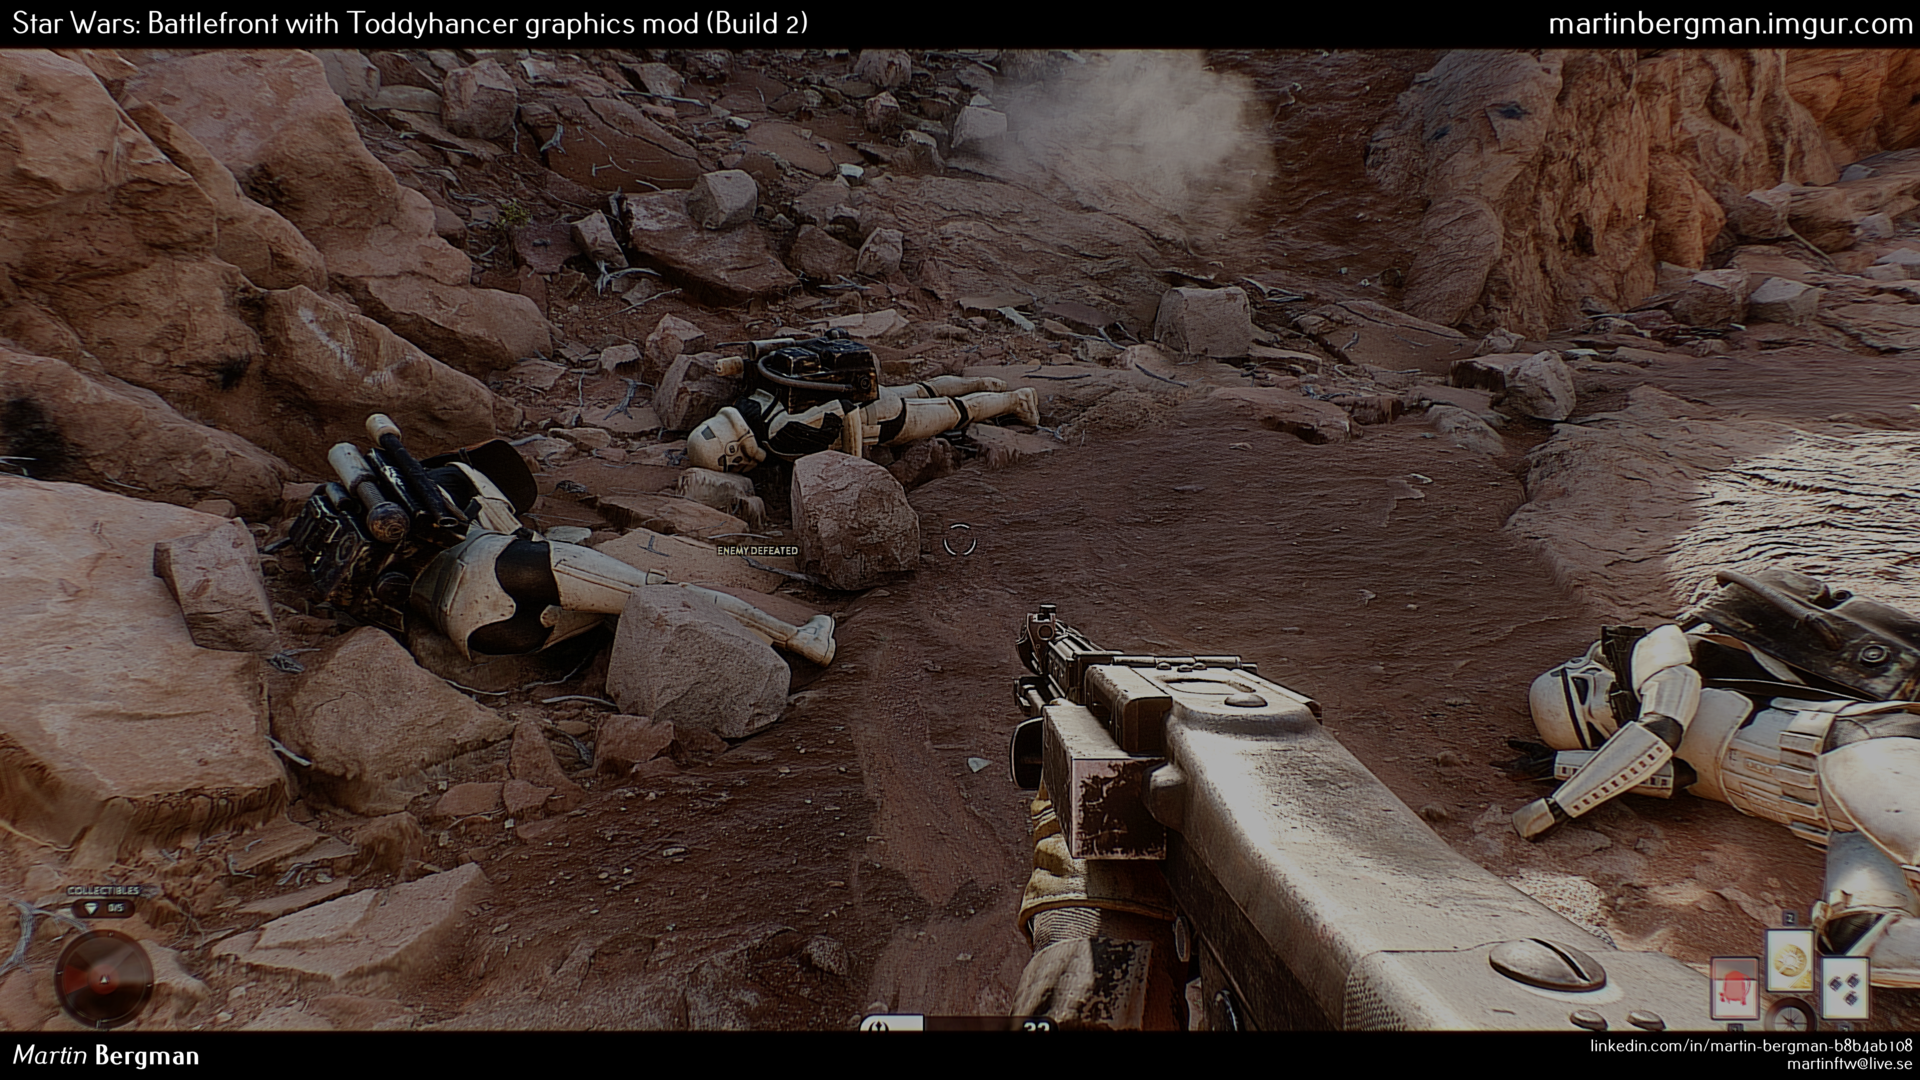 Graphics Mod Makes New Star Wars Game Look Like A New Star Wars Movie